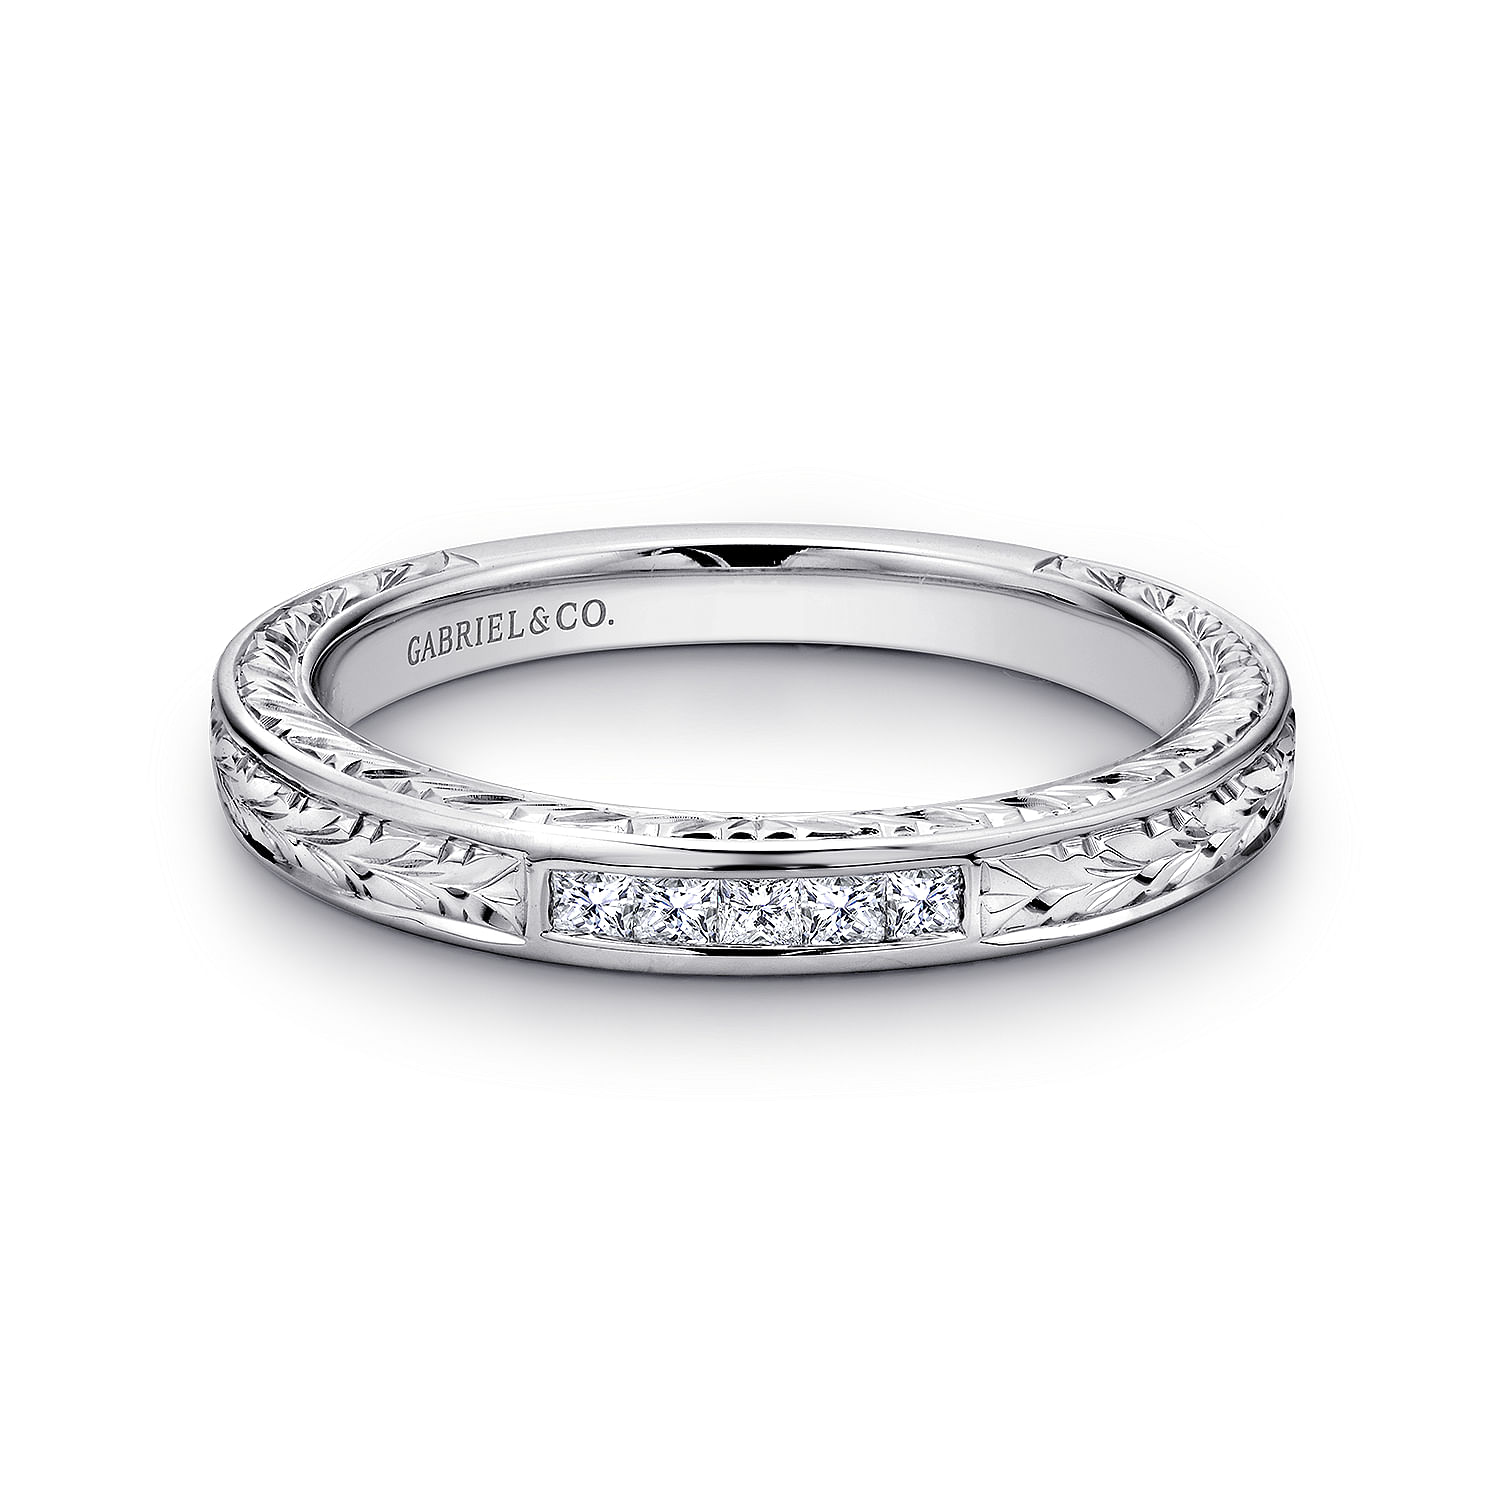 Cesaire - 14K White Gold Princess Cut 5 Stone Channel Set Diamond Wedding Band with Engraving